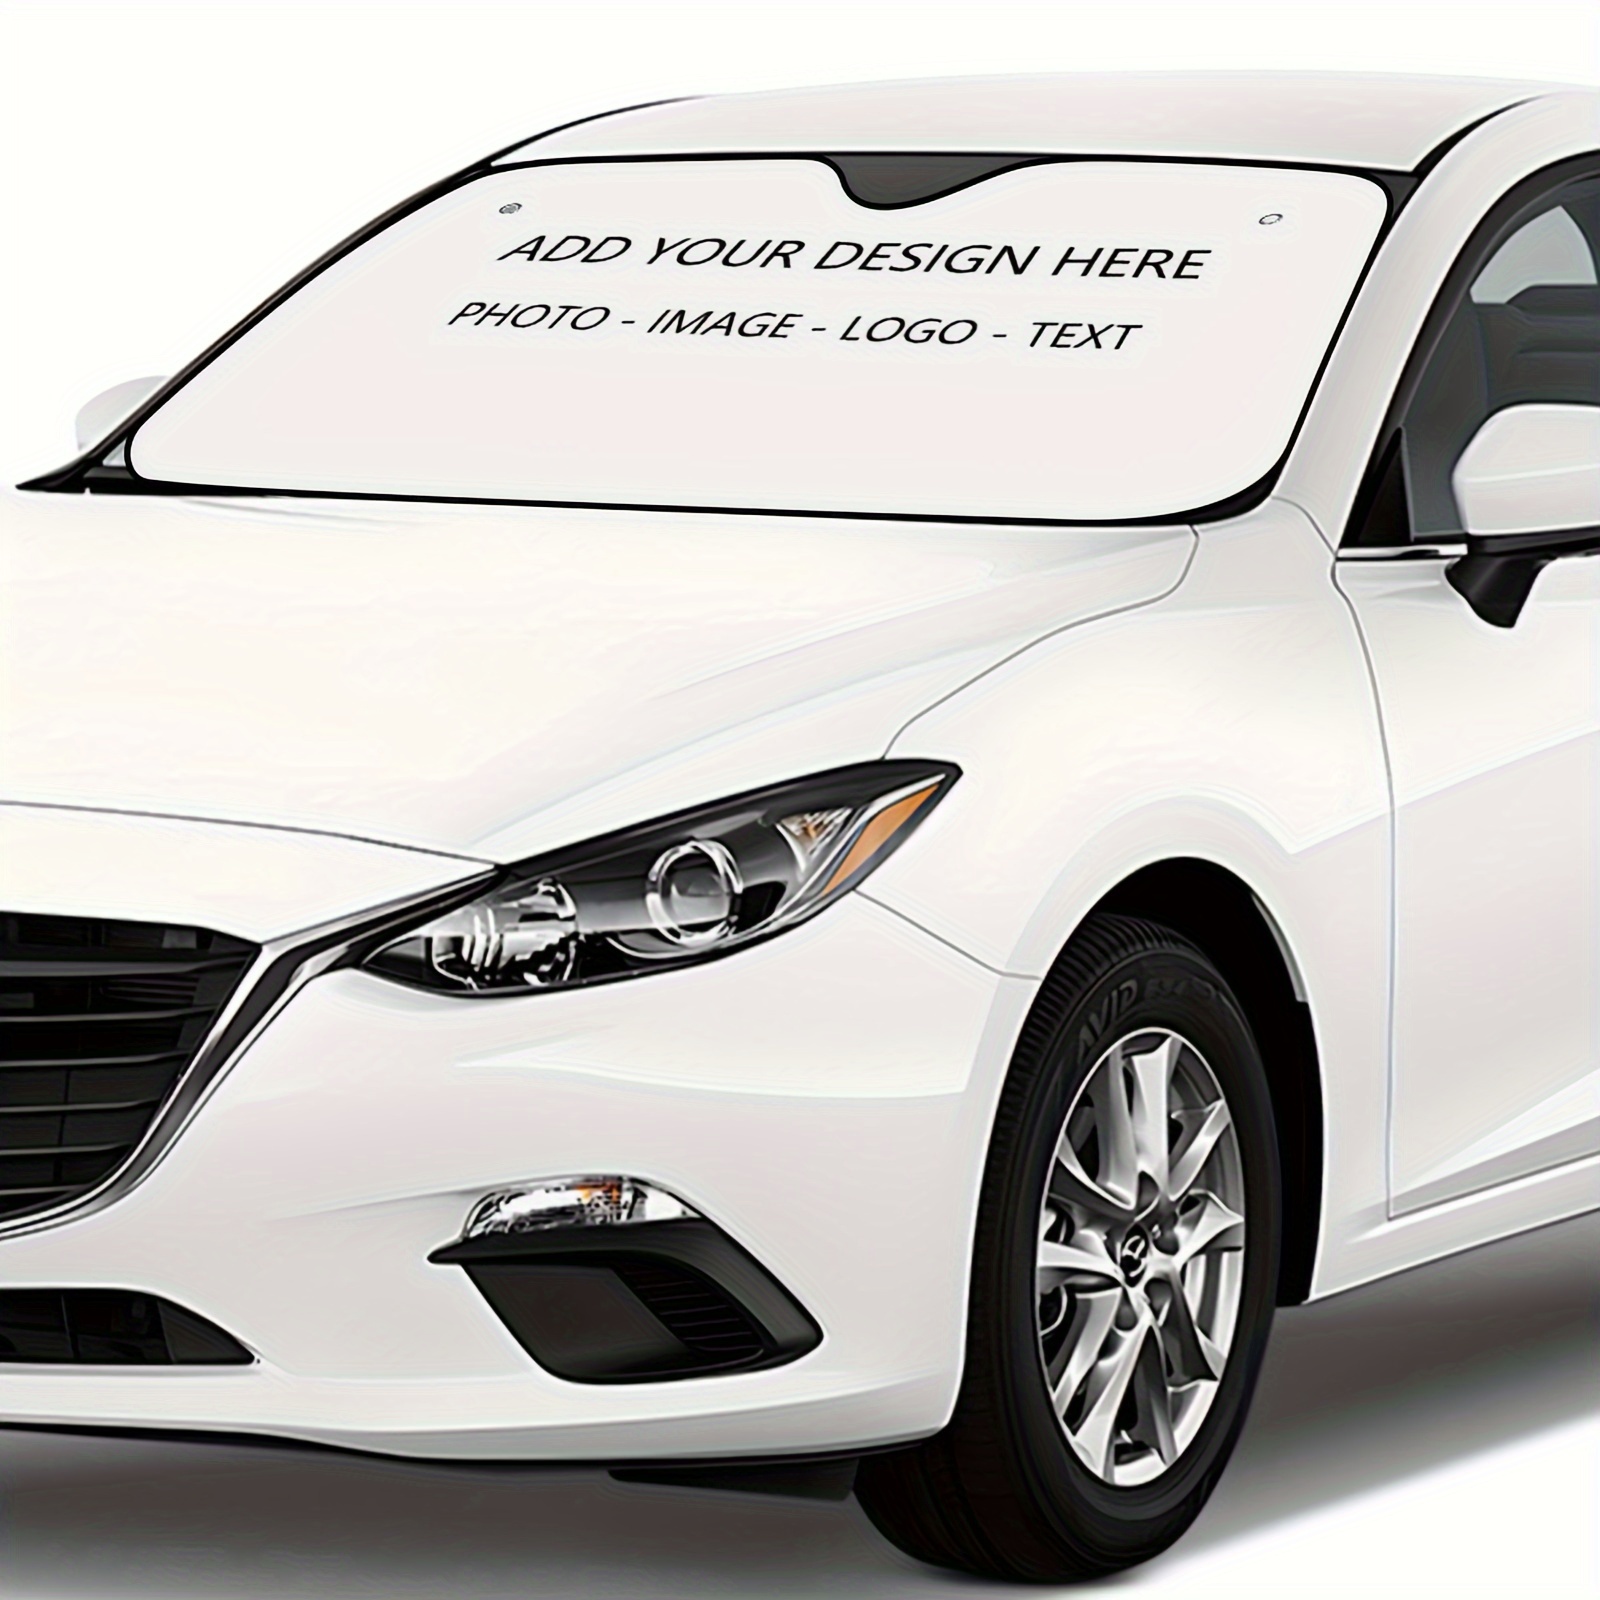 

Customized/personalized Photo Customized/personalized Text Name Car Windshields Provides Protection From Sunlight